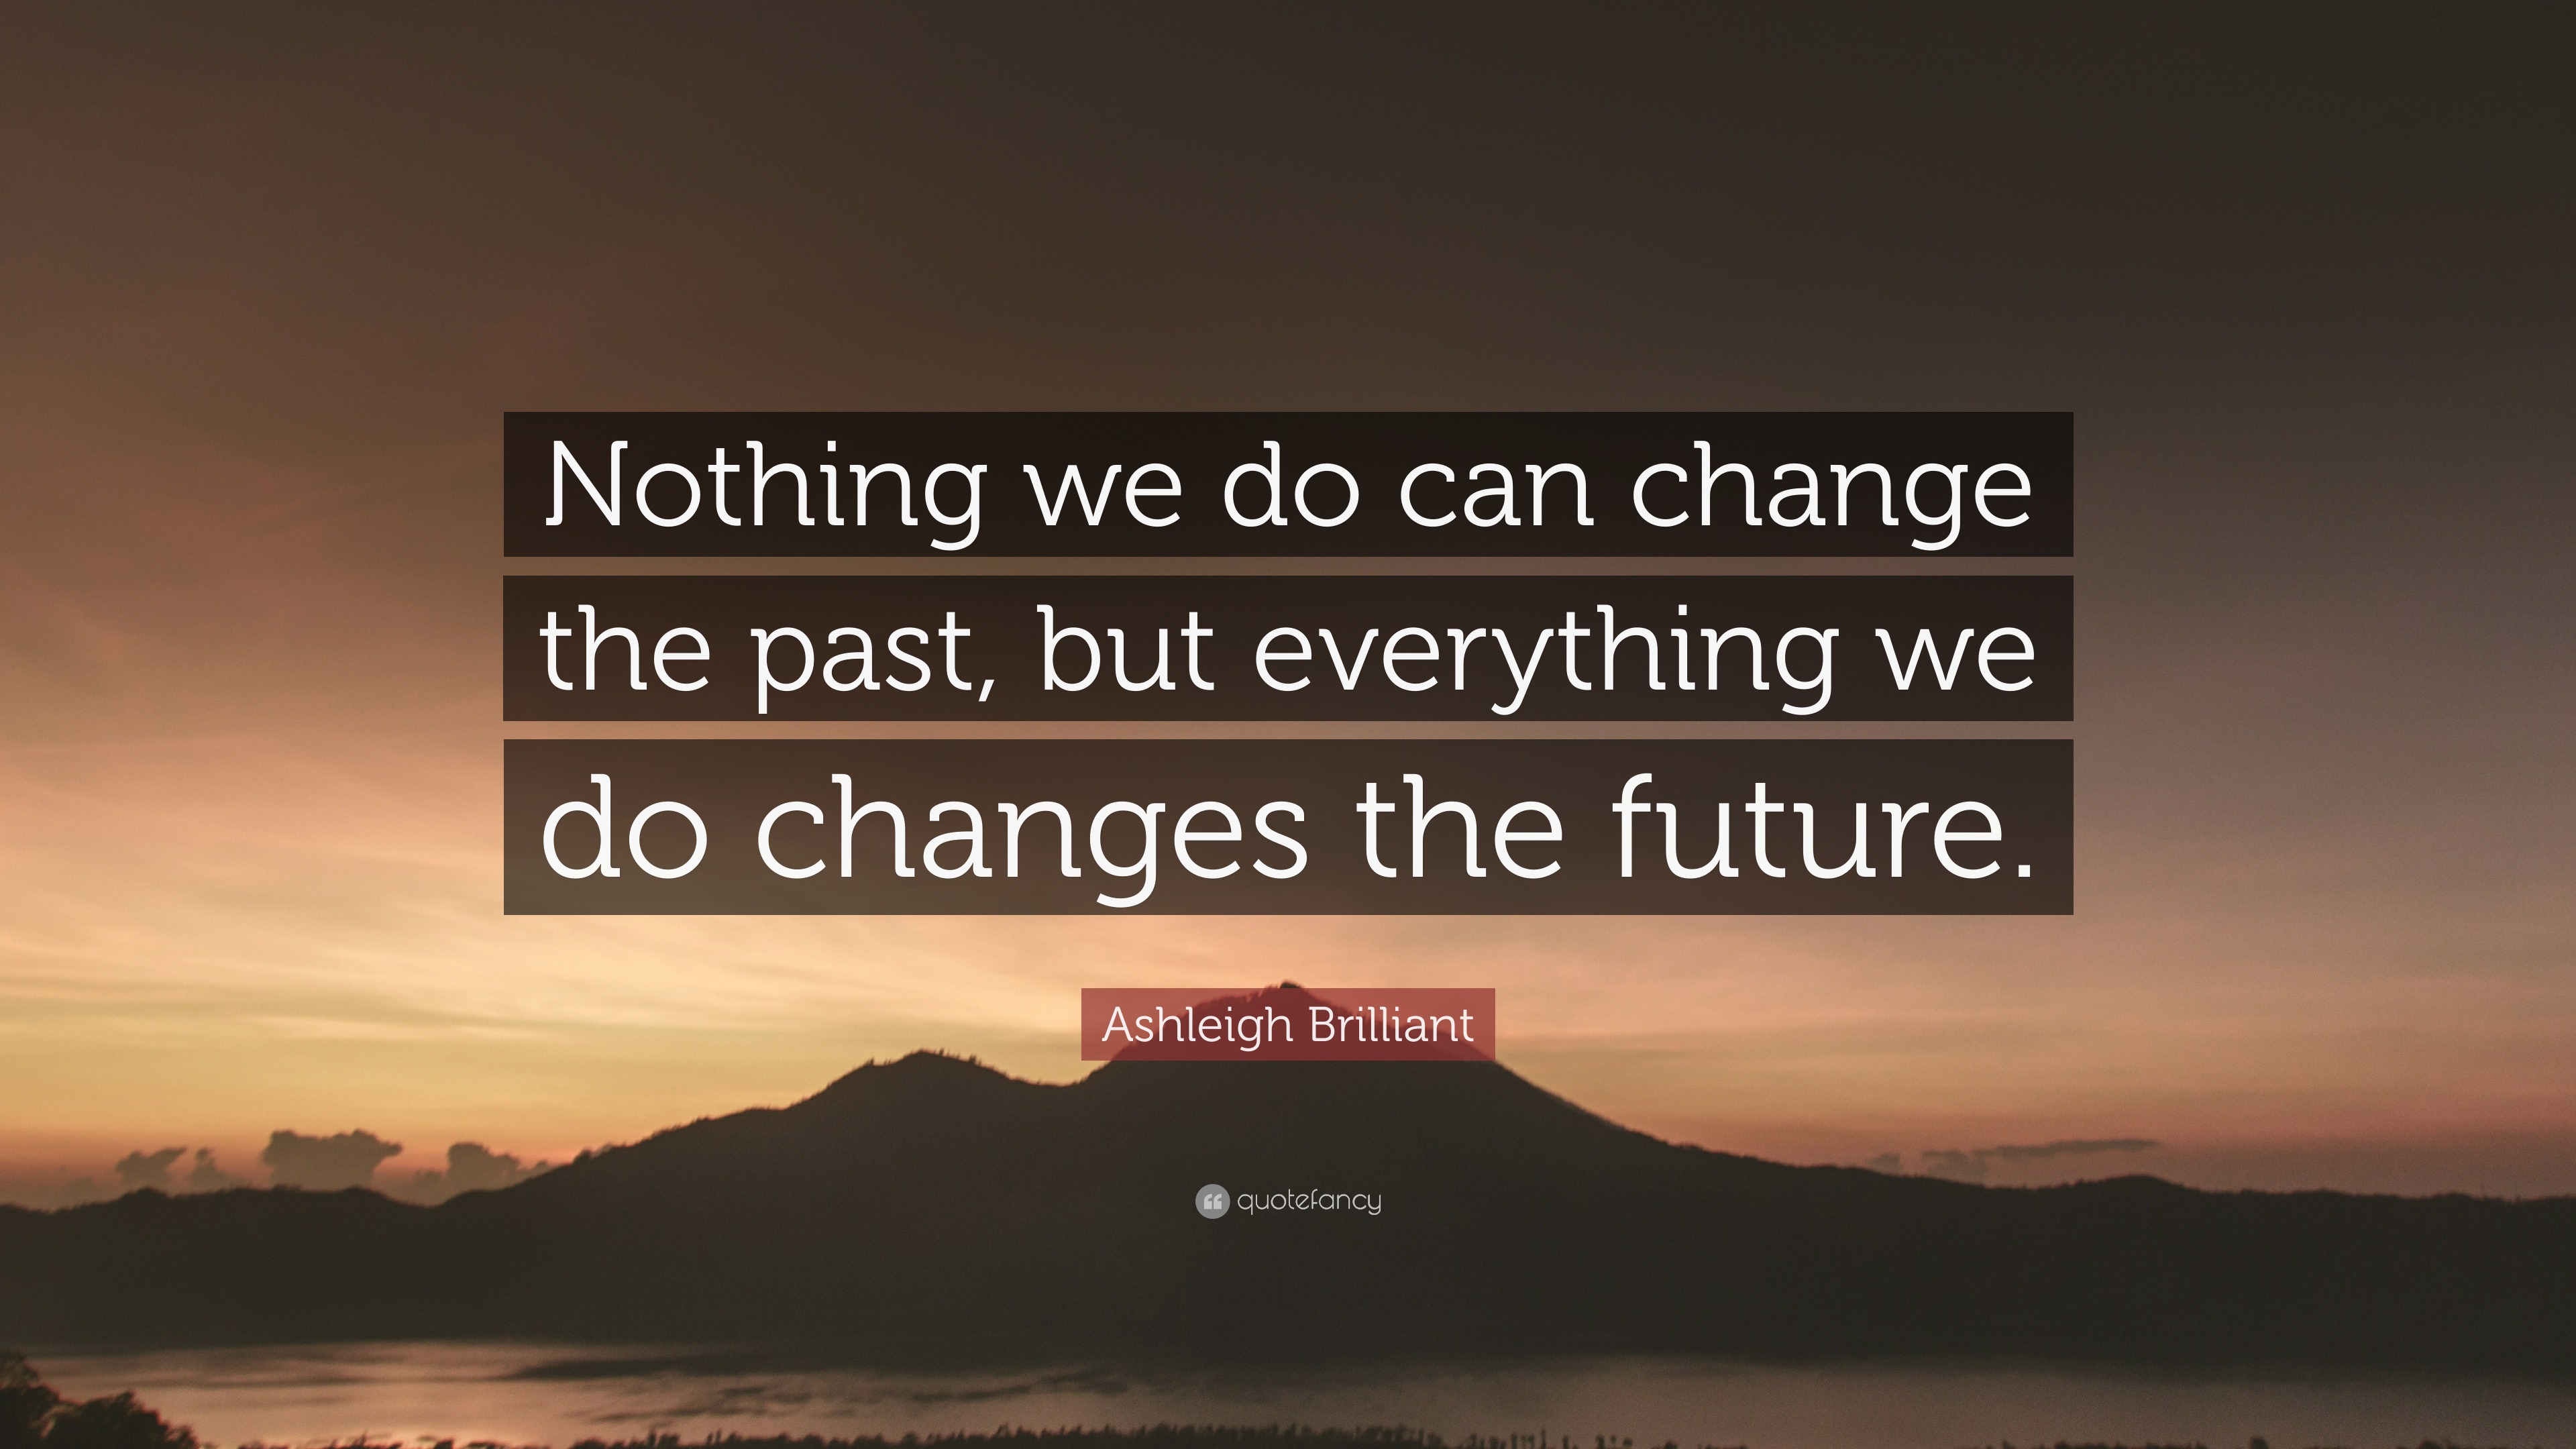 Ashleigh Brilliant Quote: “Nothing we do can change the past, but